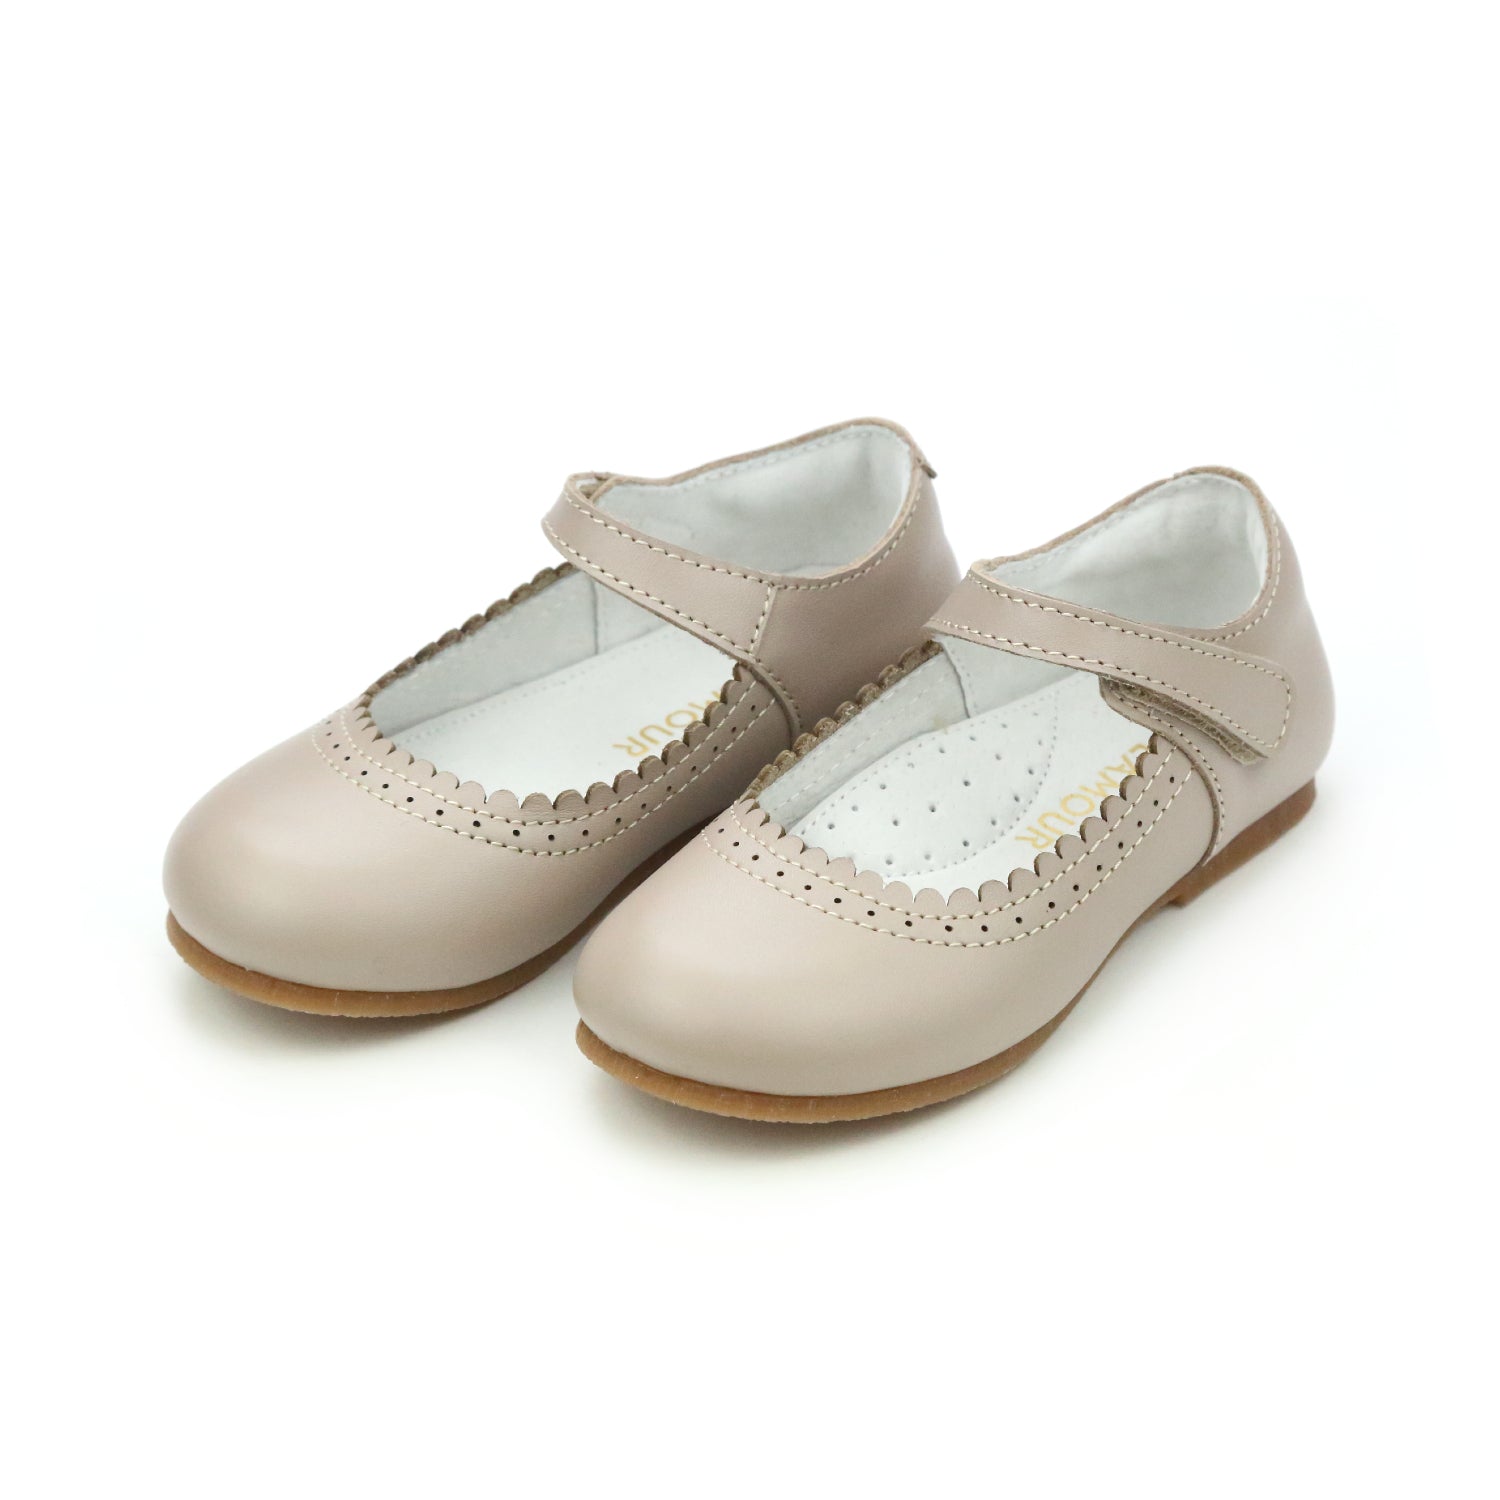 L'Amour Girls Special Occasion Rosette Flats – Babychelle